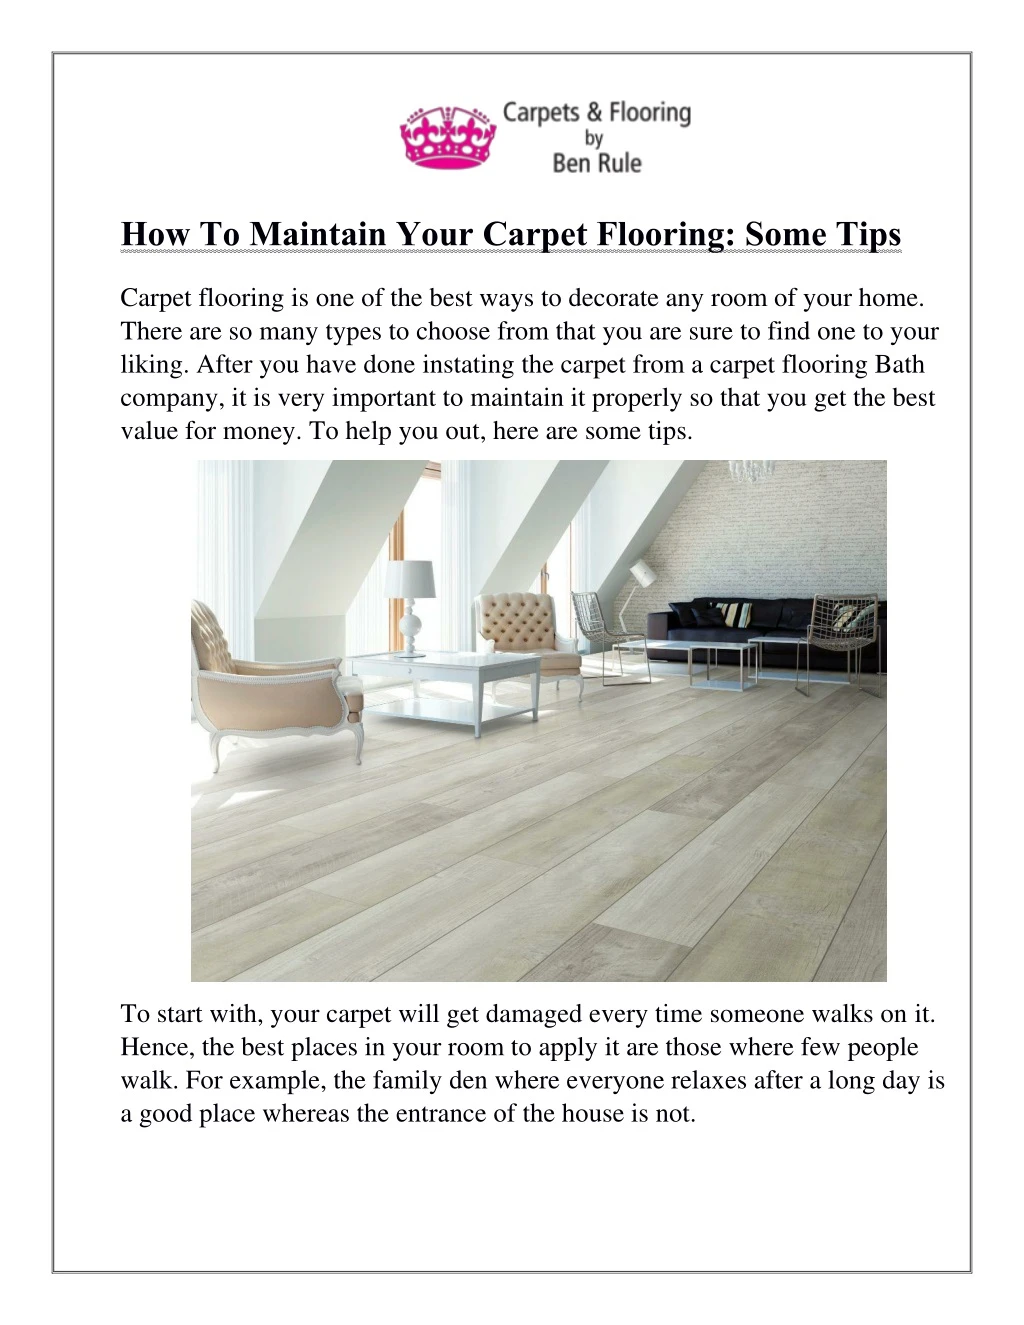 how to maintain your carpet flooring some tips